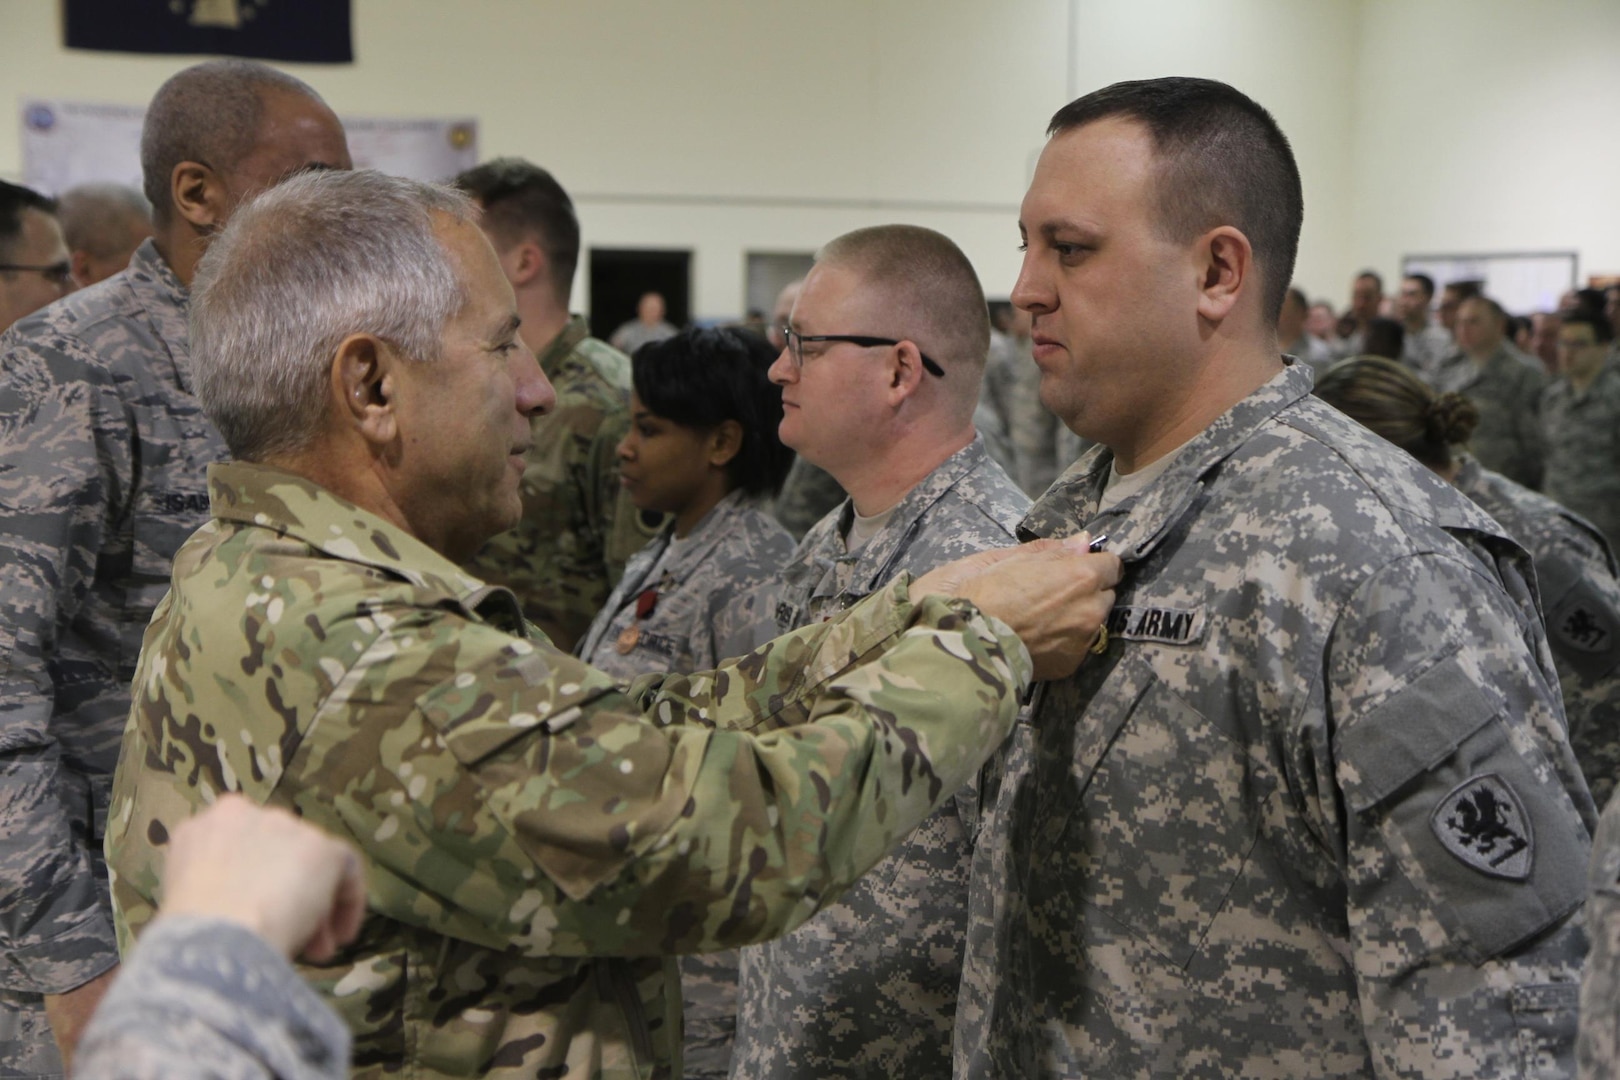 Maj. Gen. Gregory Vadnais, adjutant general of the Michigan National Guard, awards Capt. Anthony Corsi, a member of the Detroit-based 1225th Support Battalion, with a Michigan Active State Service Ribbon with Bronze Oak Leaf Device and the Michigan Legion of Merit Medal, Jan. 25, 2016, for his service with Task Force Flint. Corsi and four other Michigan National Guard Soldiers comprised the TFF Warehouse team that managed the inventory of bottled water and other supplies distributed to Flint residents. 